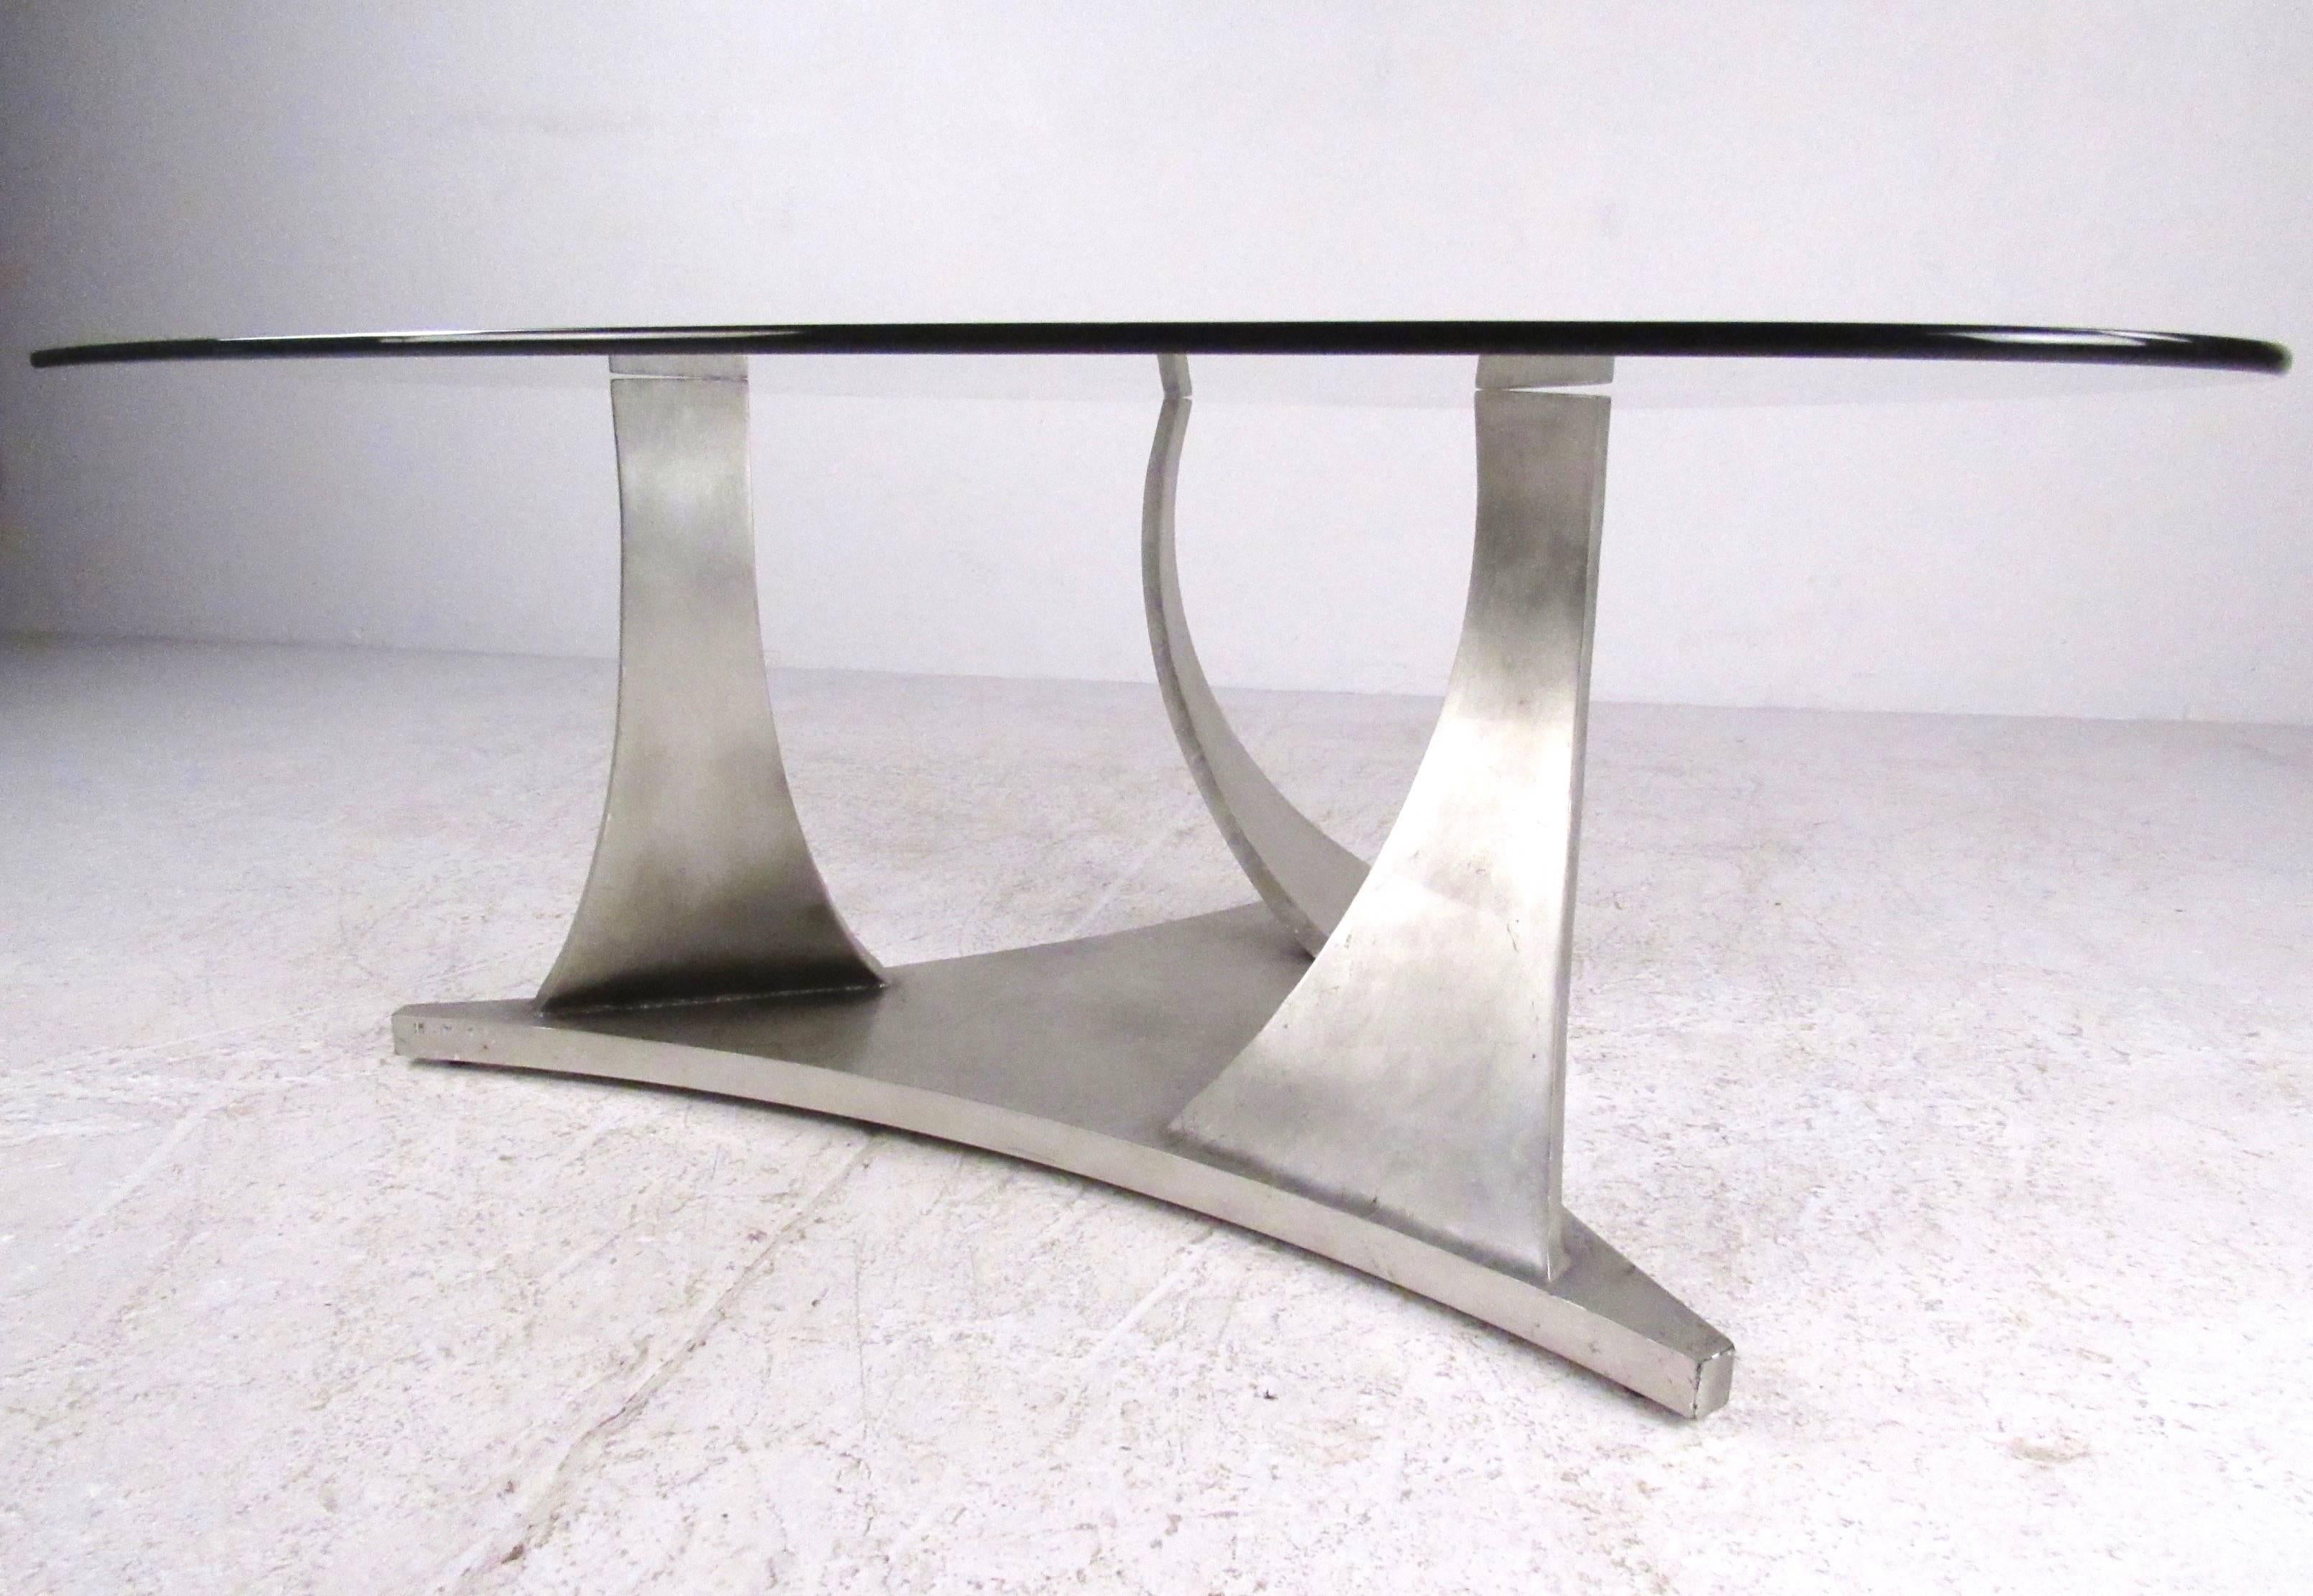 This stylish modern cocktail table features sculpted metal base and unique triangular style glass top. This substantial metal base features a metallic color paint job, while the proportions and impressive size make this a wonderful centre table in